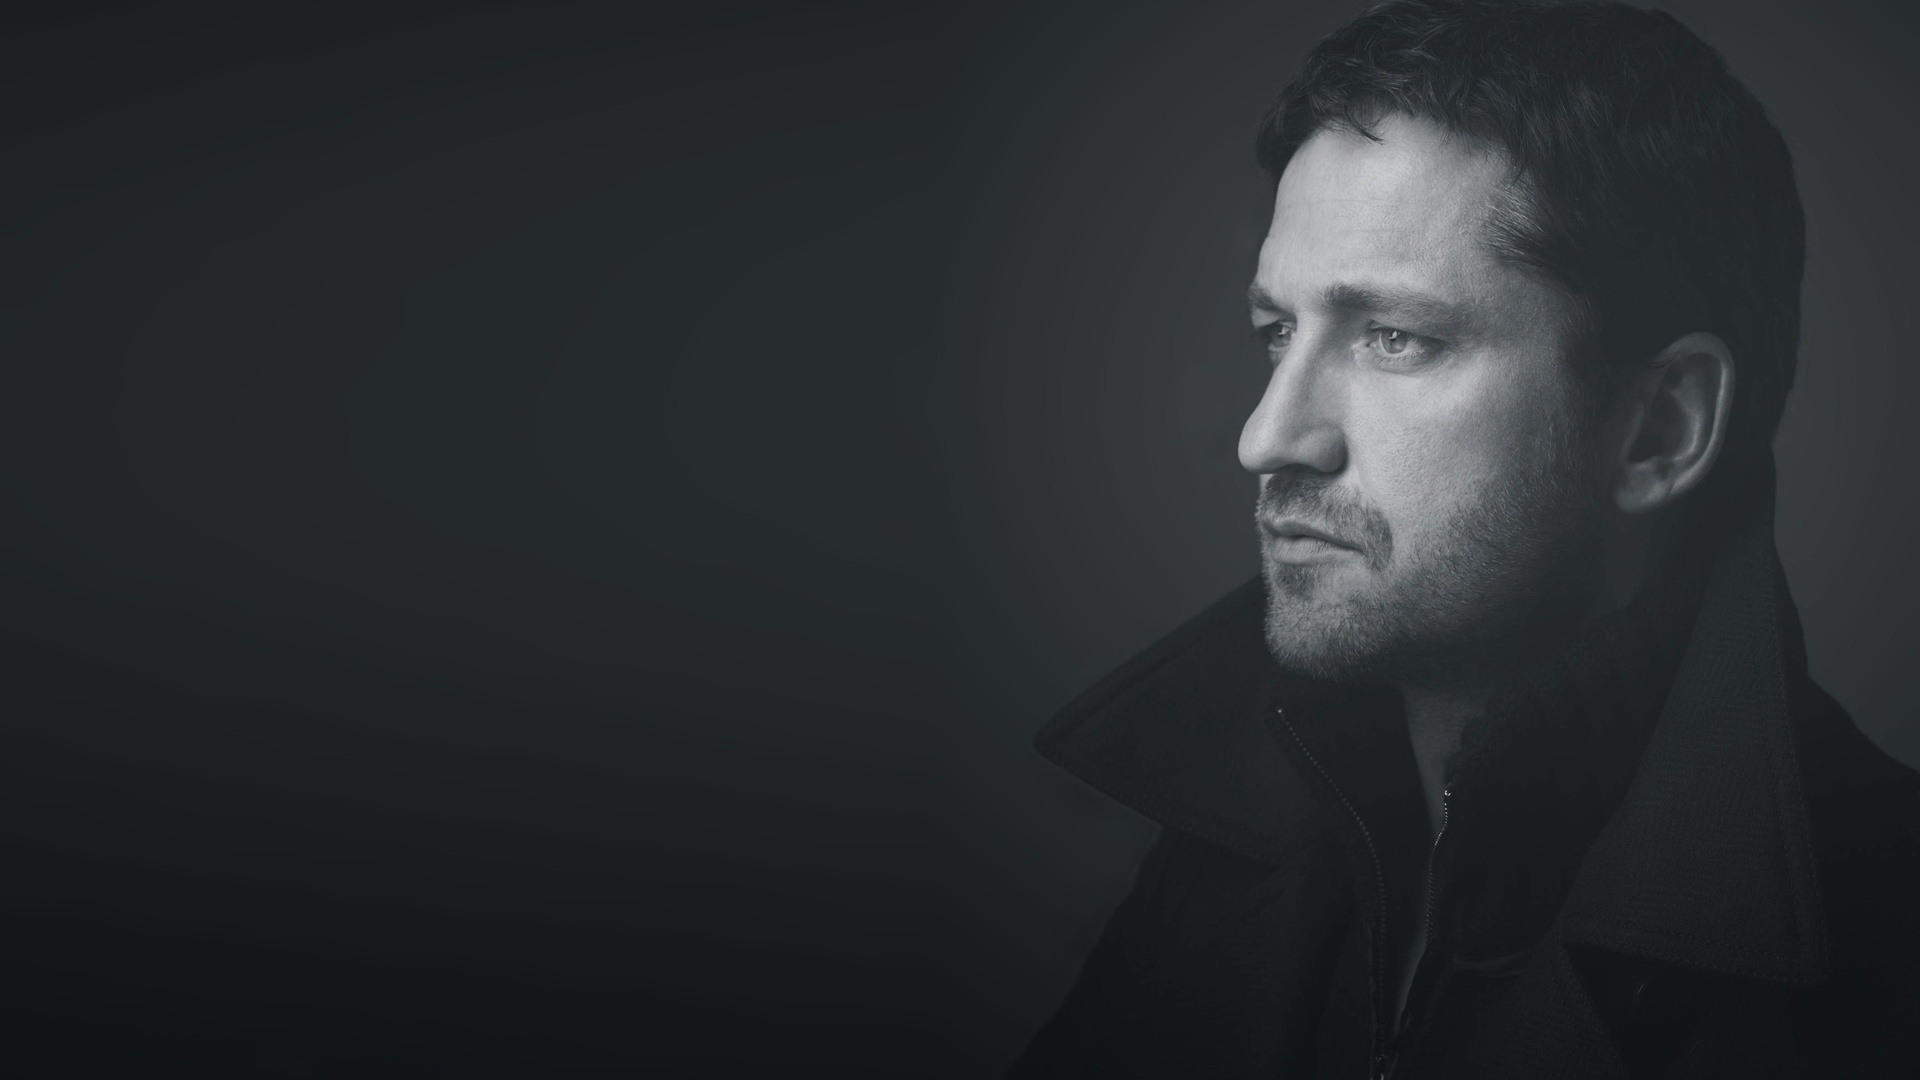 Thoughtful Gerard Butler for 1920 x 1080 HDTV 1080p resolution